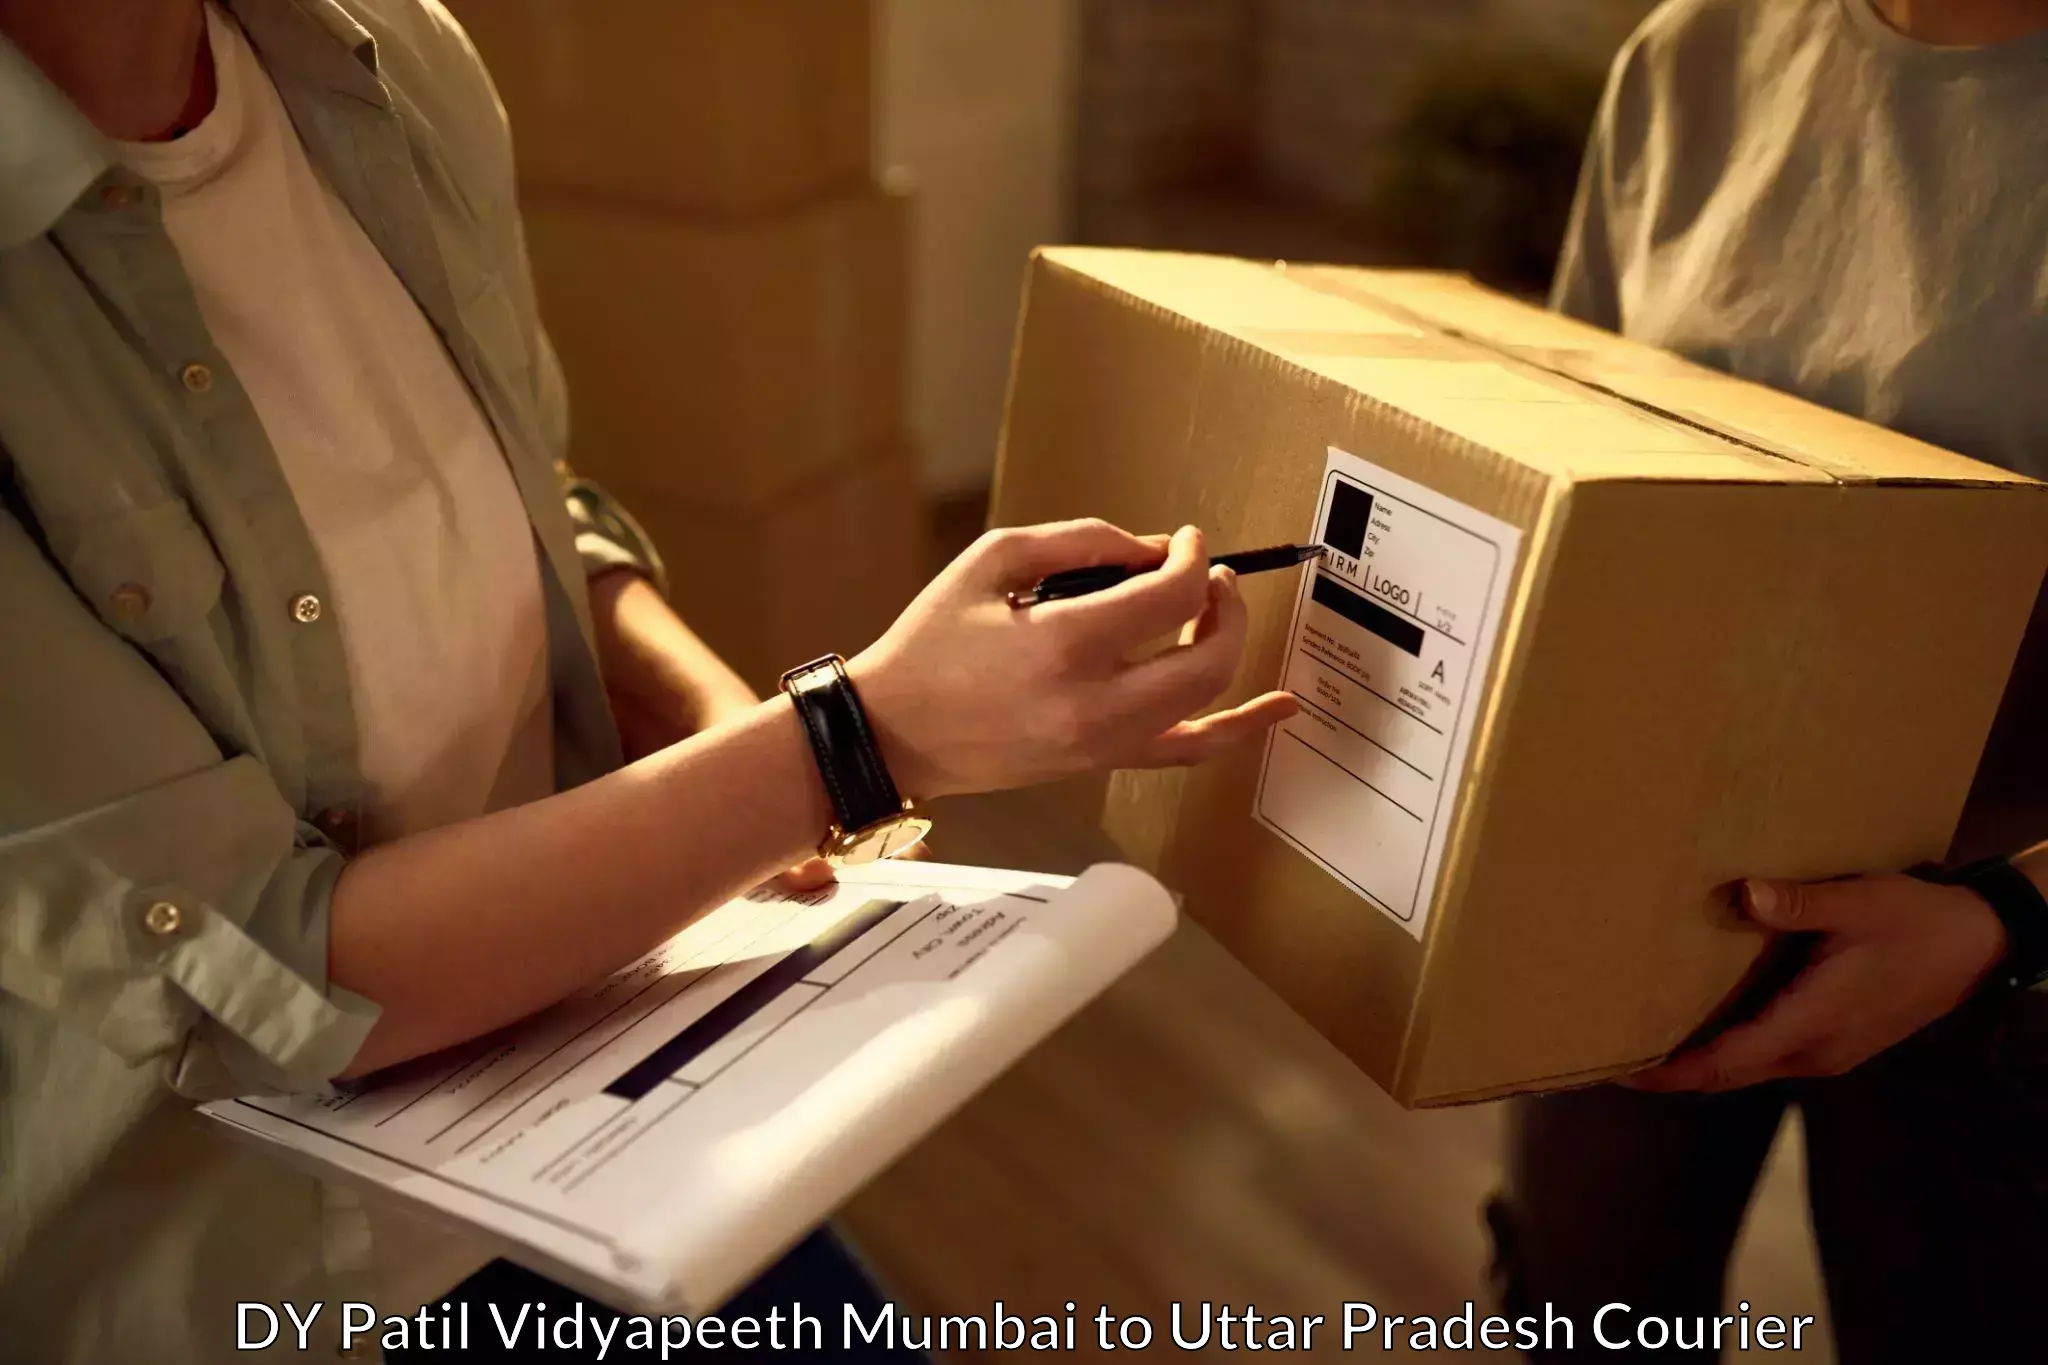 Emergency parcel delivery DY Patil Vidyapeeth Mumbai to Bareilly